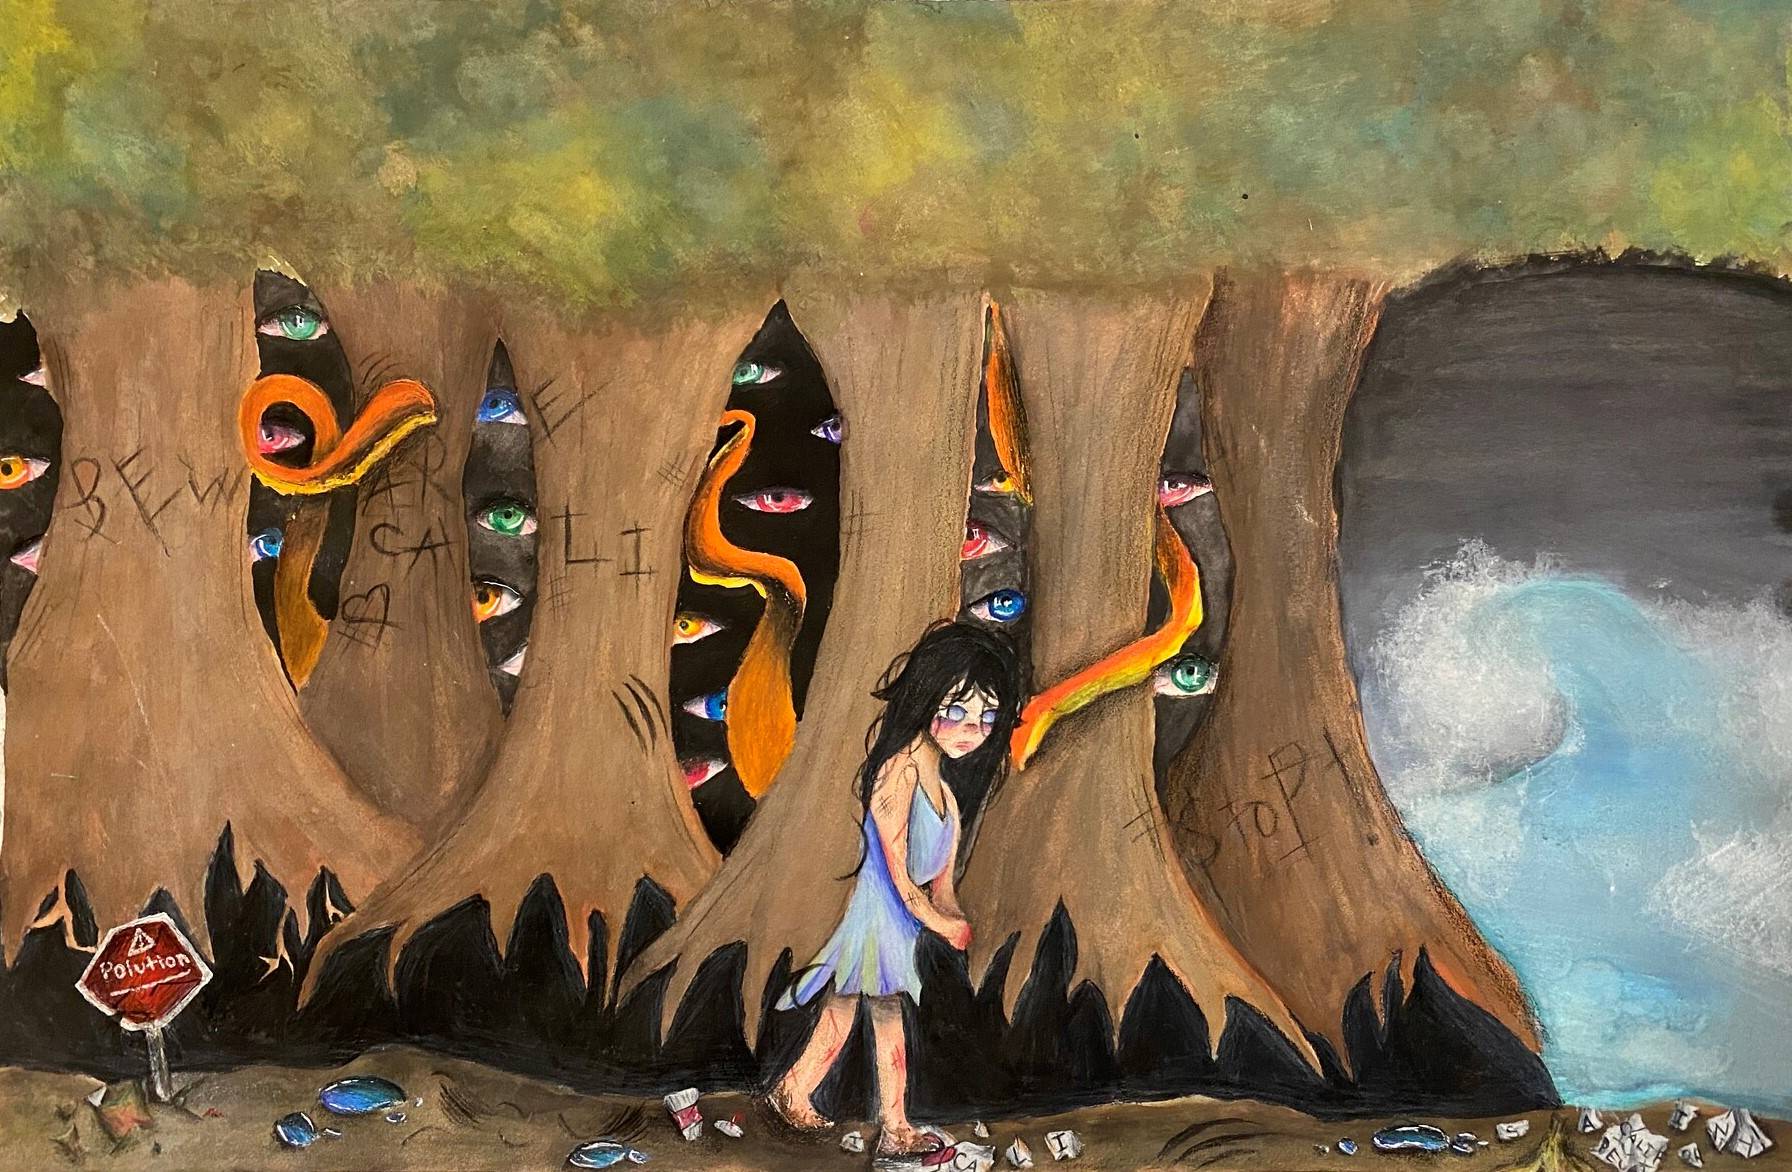 A child walks sadly next to the ocean through a forest full of floating eys and tentacles. Trash is on the ground. A sign says Pollution. Carved into the trees are the words Beware, Cali, Stop!